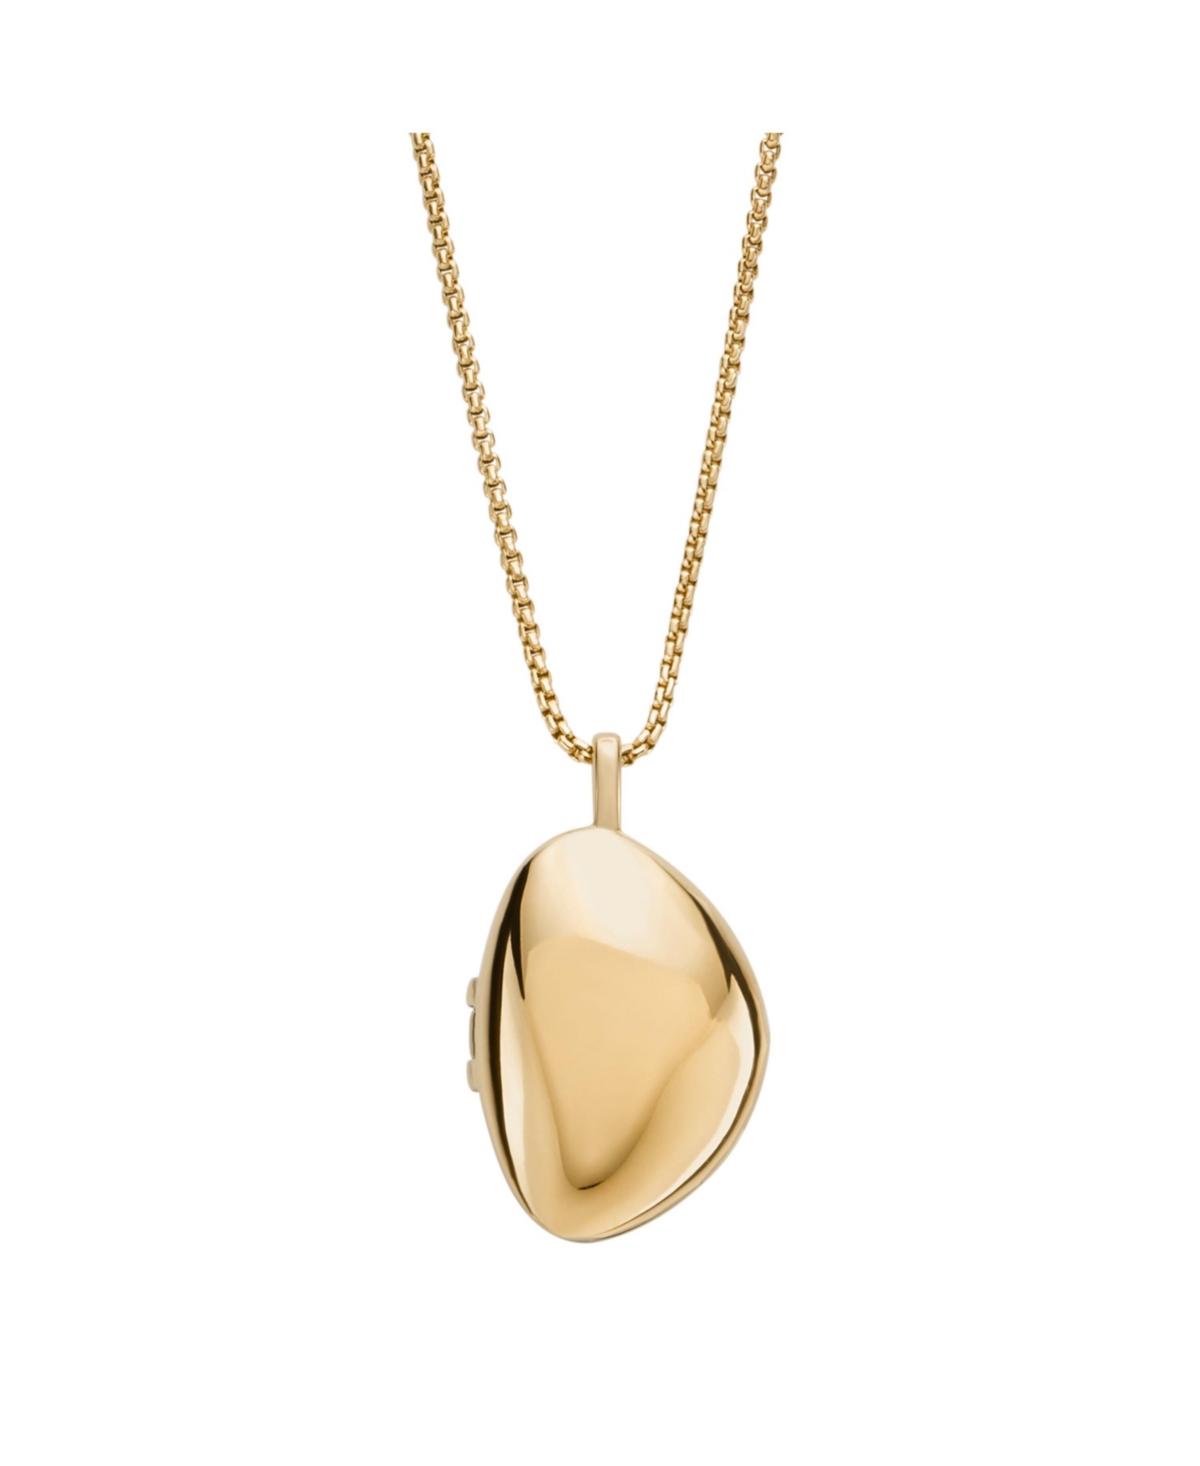 Women's Anja Pebble Locket Gold-Tone Stainless Steel Chain Necklace, SKJ1752710 - Gold